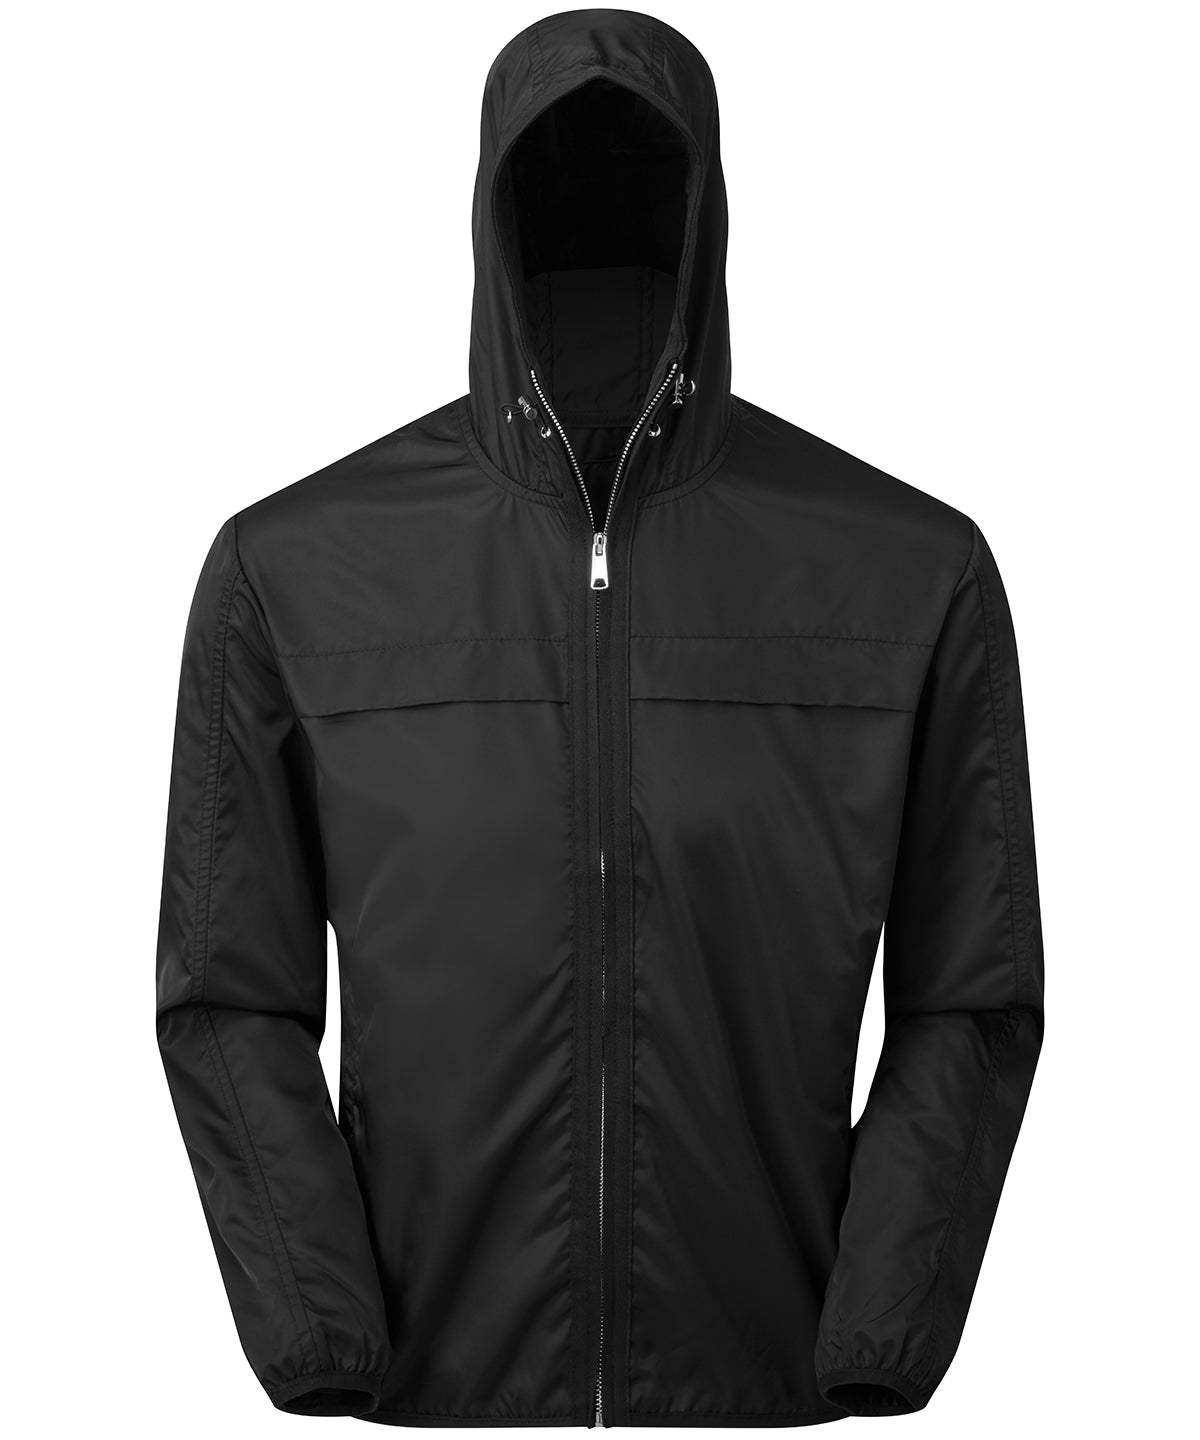 Personalised Jackets - Black Asquith & Fox Men's lightweight shell jacket